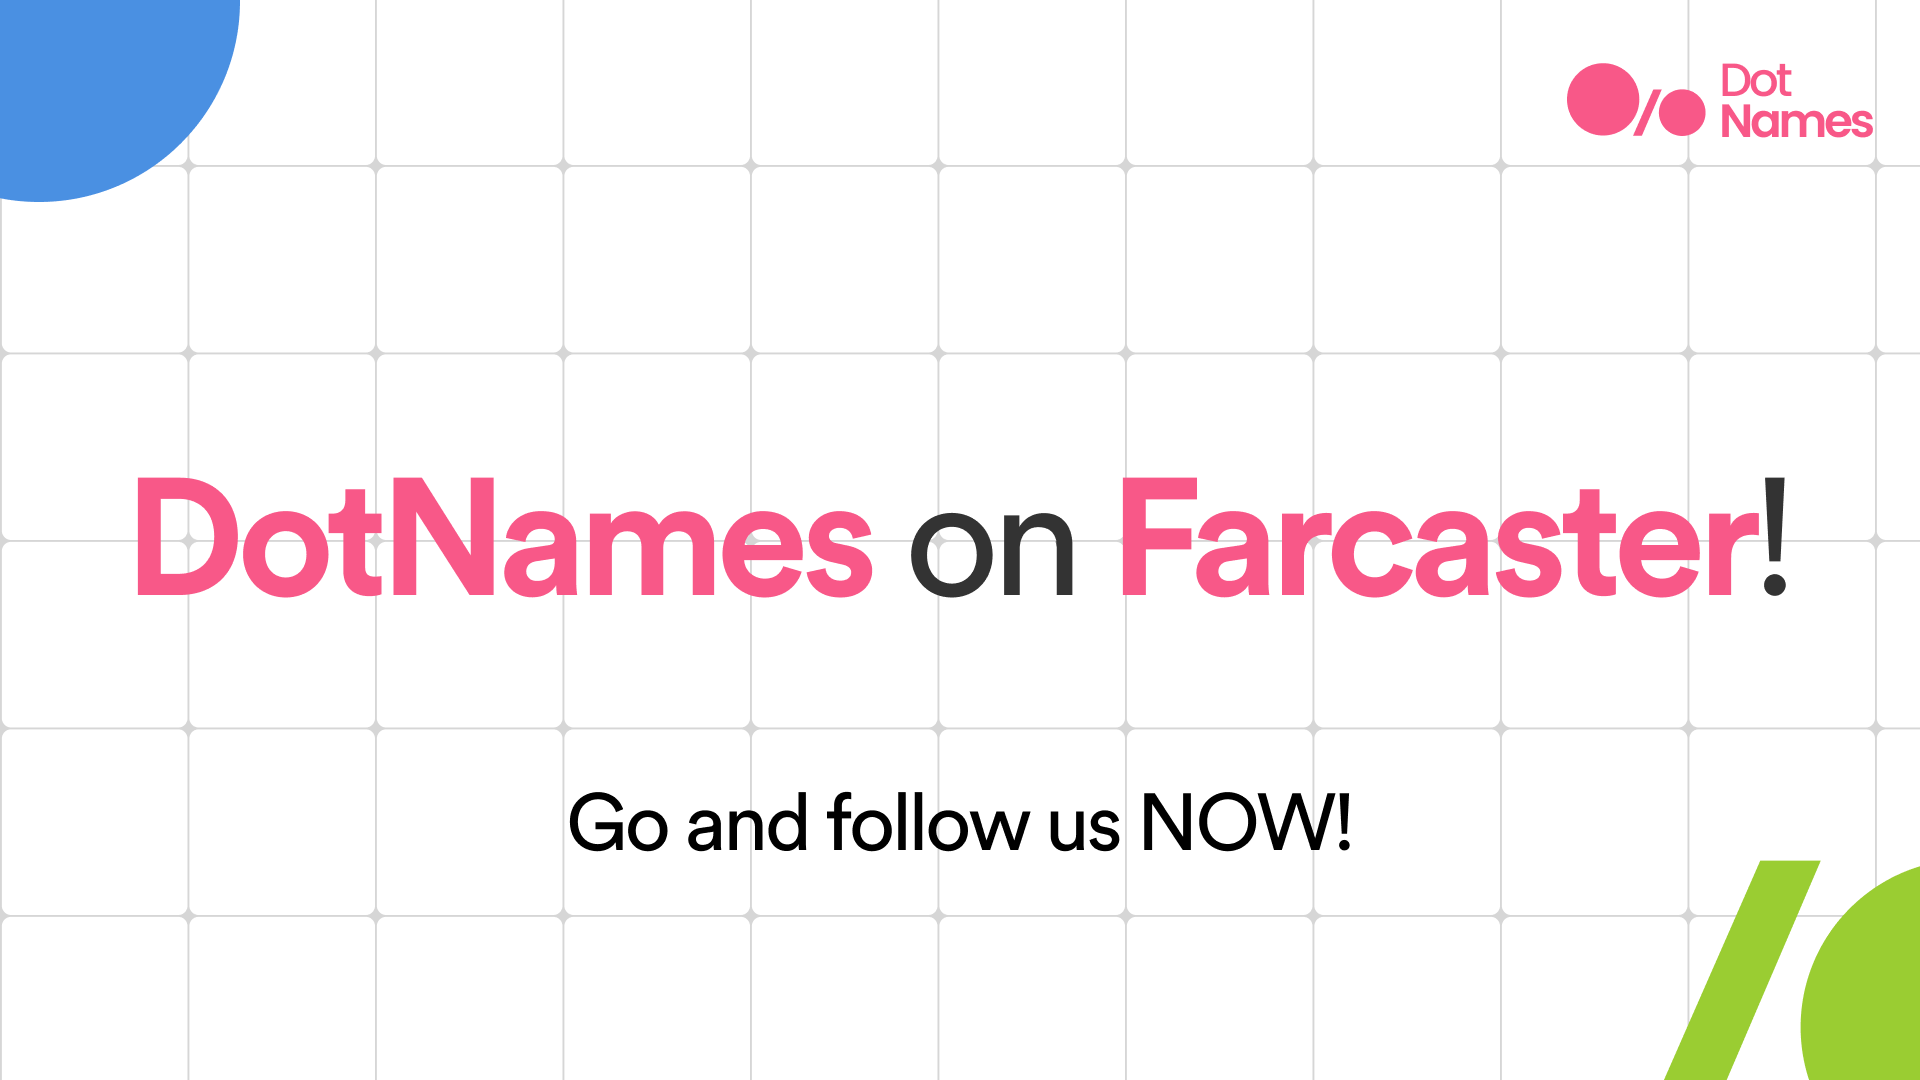 Level Up Your Farcaster Presence: Claim Your Free DotNames Identity Today!